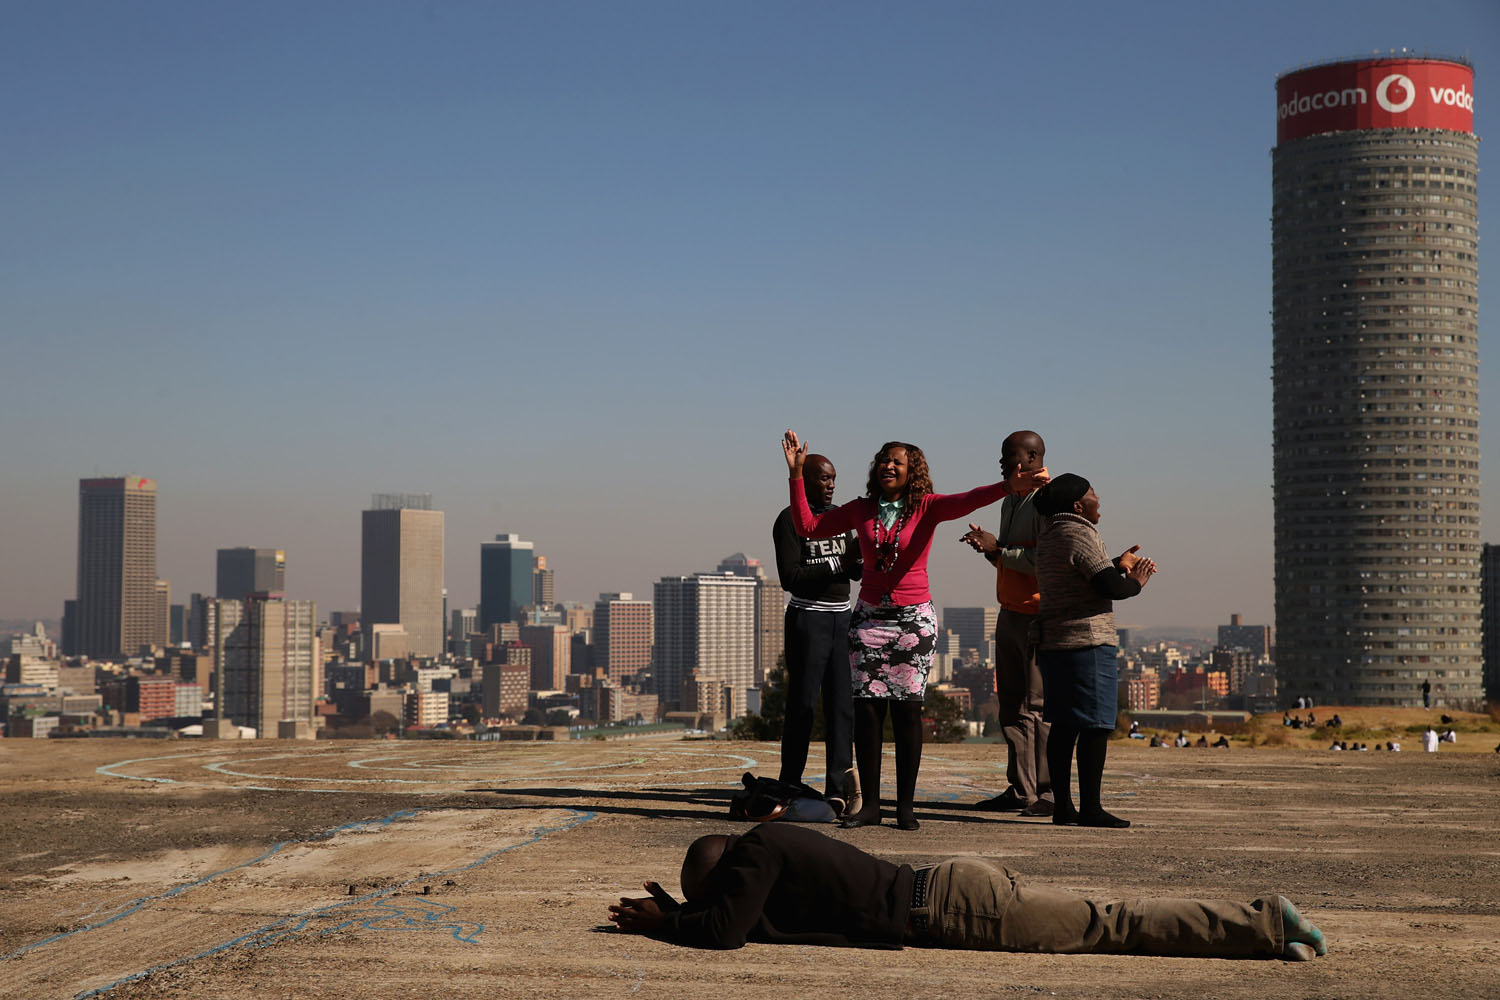 June 21, 2013. Worshipers sing and pray on top of an unfinished building on a hill overlooking downtown in the Yeoville neighborhood in Johannesburg, South Africa.